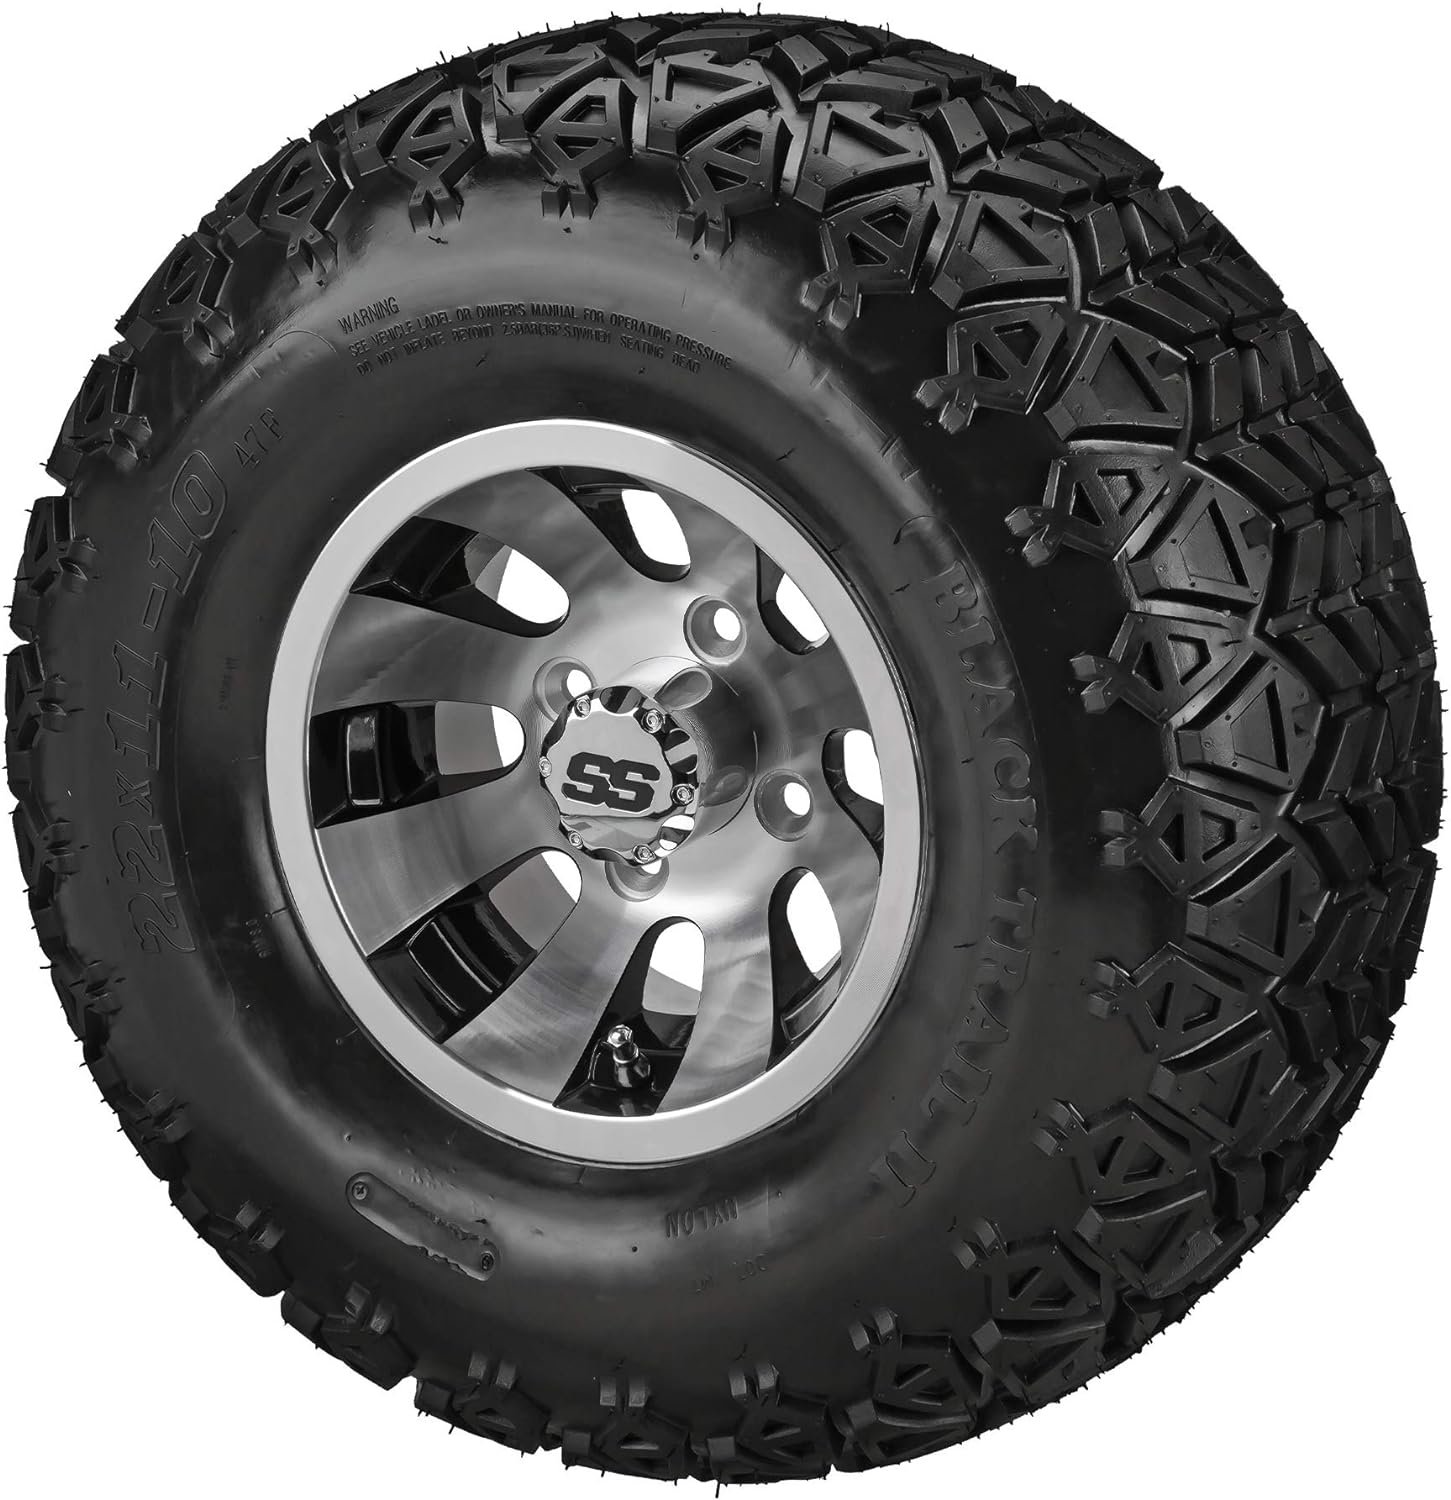 RM Cart - 10 Gunslinger Black/Machined on 22x11-10 Black Trail II Tires (Set of 4), Fits Club Car  EZ-Go carts, Golf Cart Tires and Wheels Combo, Can be Used on Lawn Mowers and ATVs